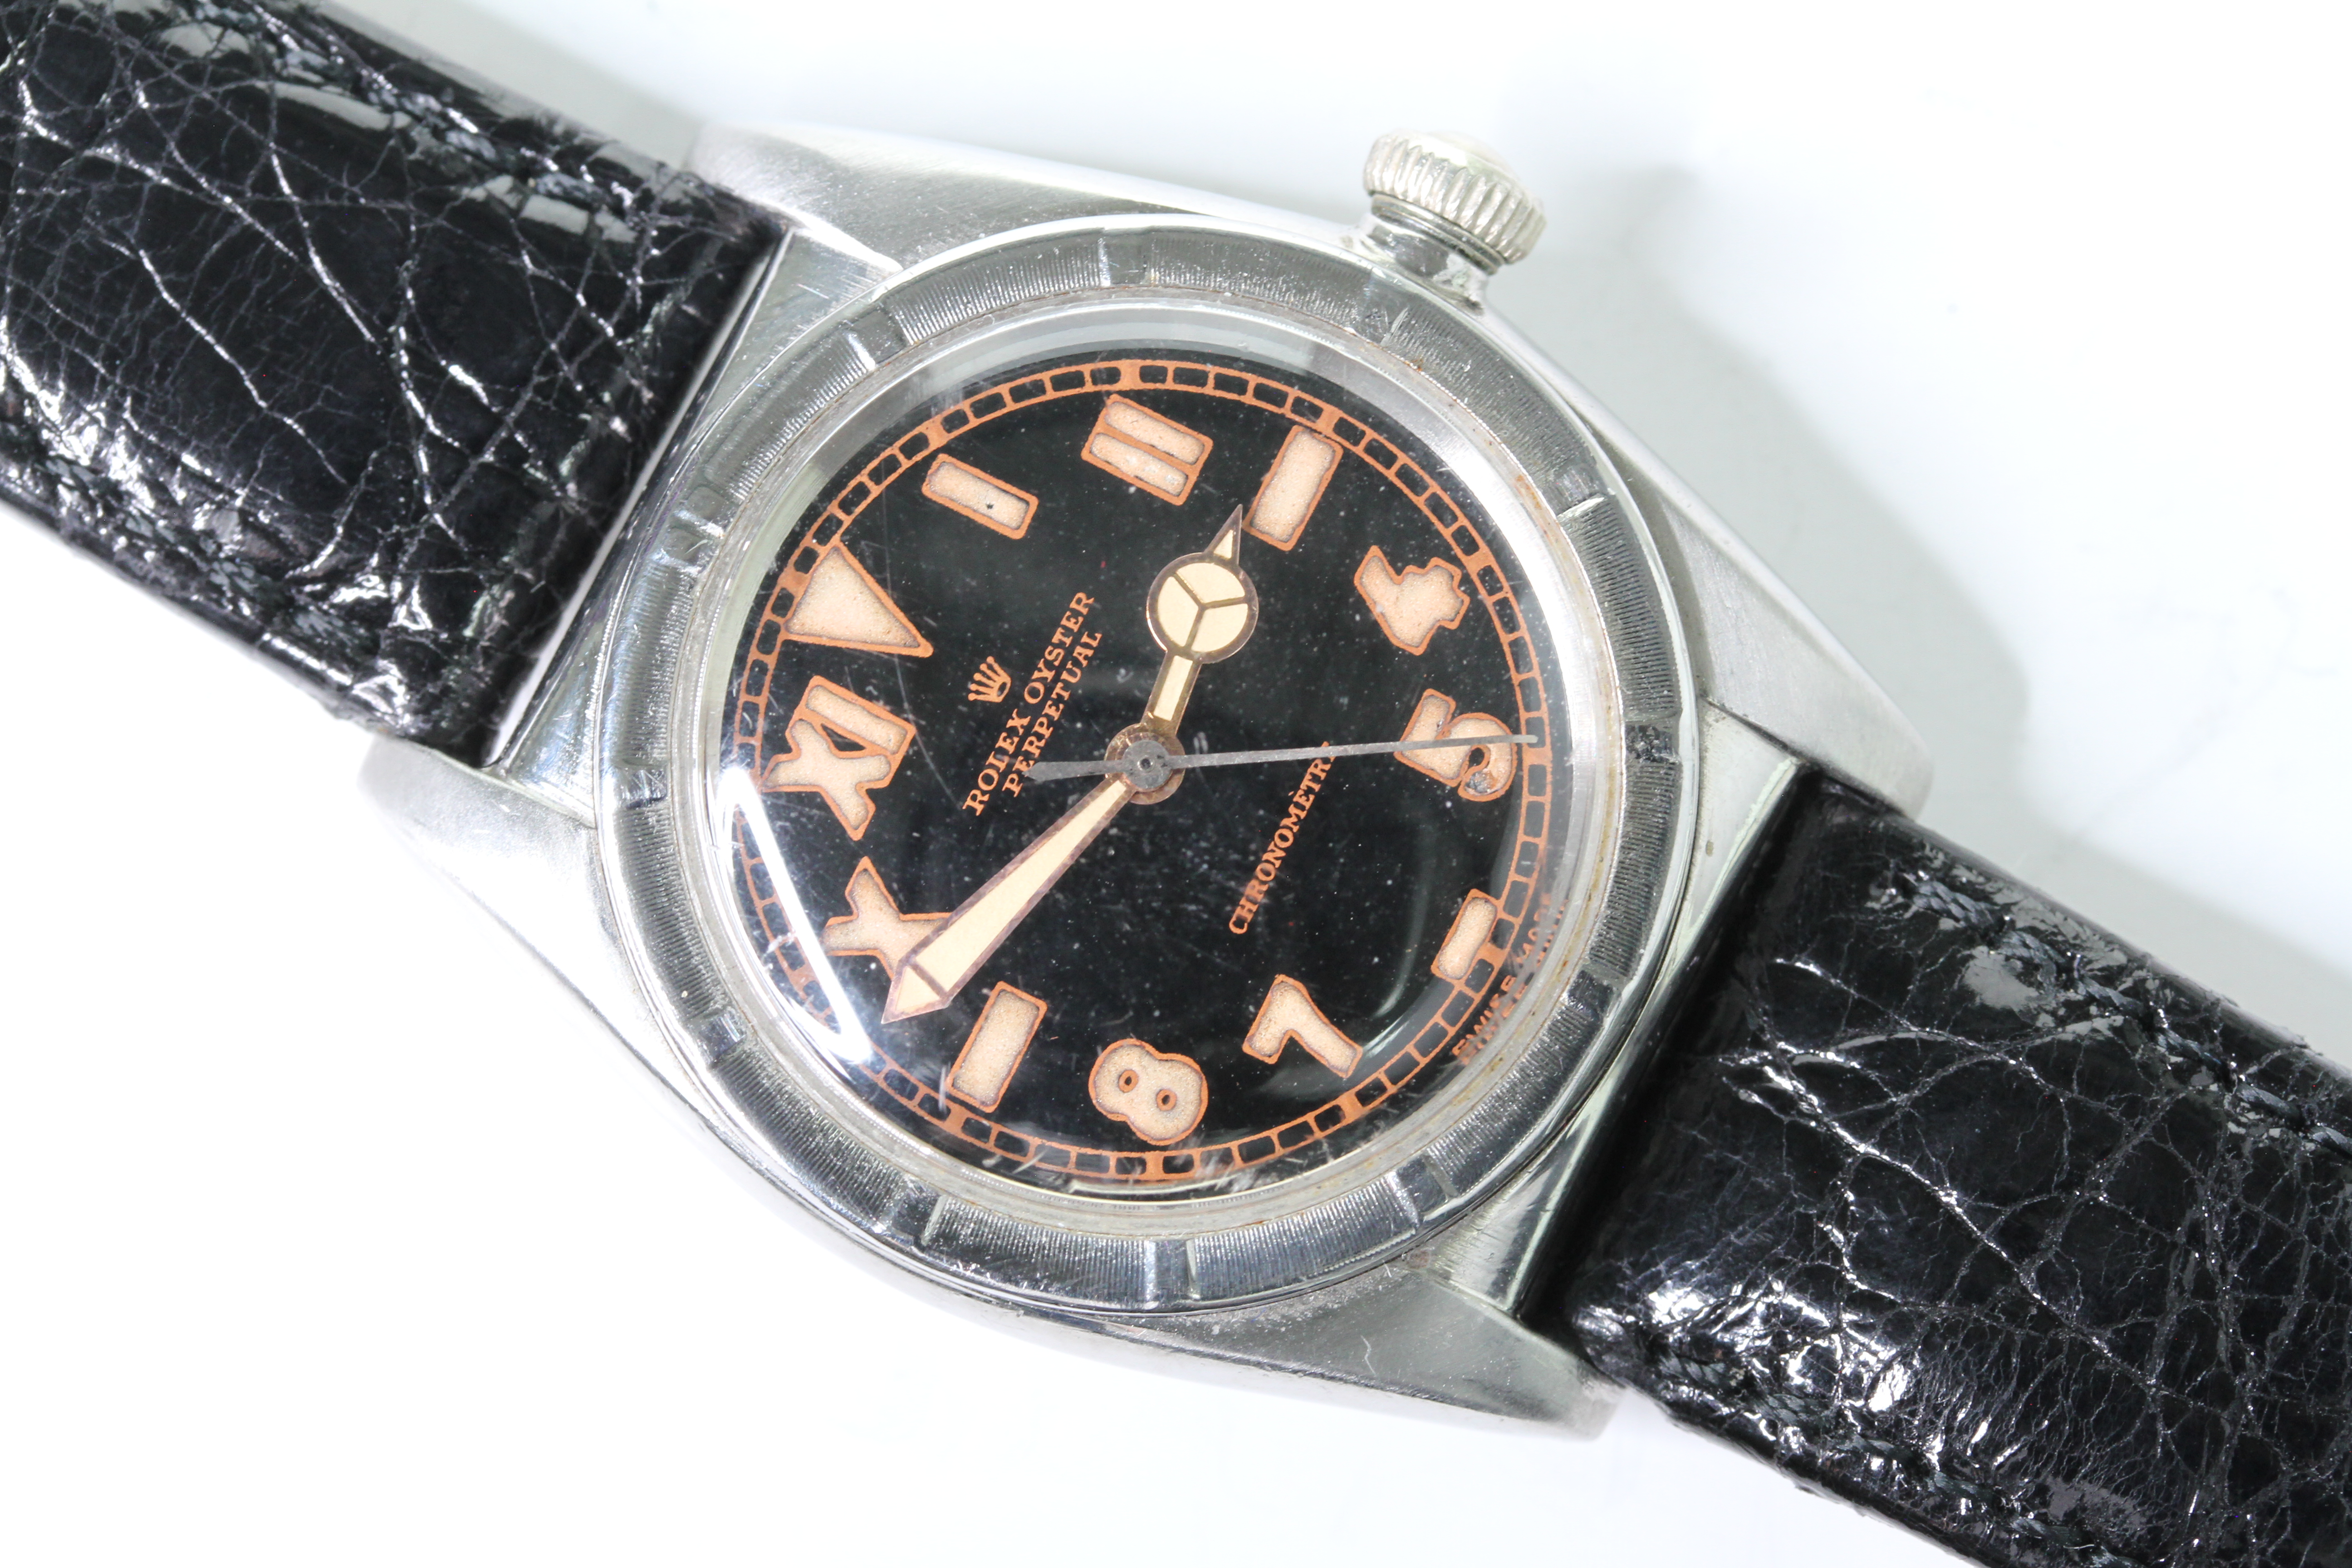 ROLEX OYSTER PERPETUAL 'BUBBLE BACK' REFERENCE 3372 CIRCA 1940s - Image 2 of 6